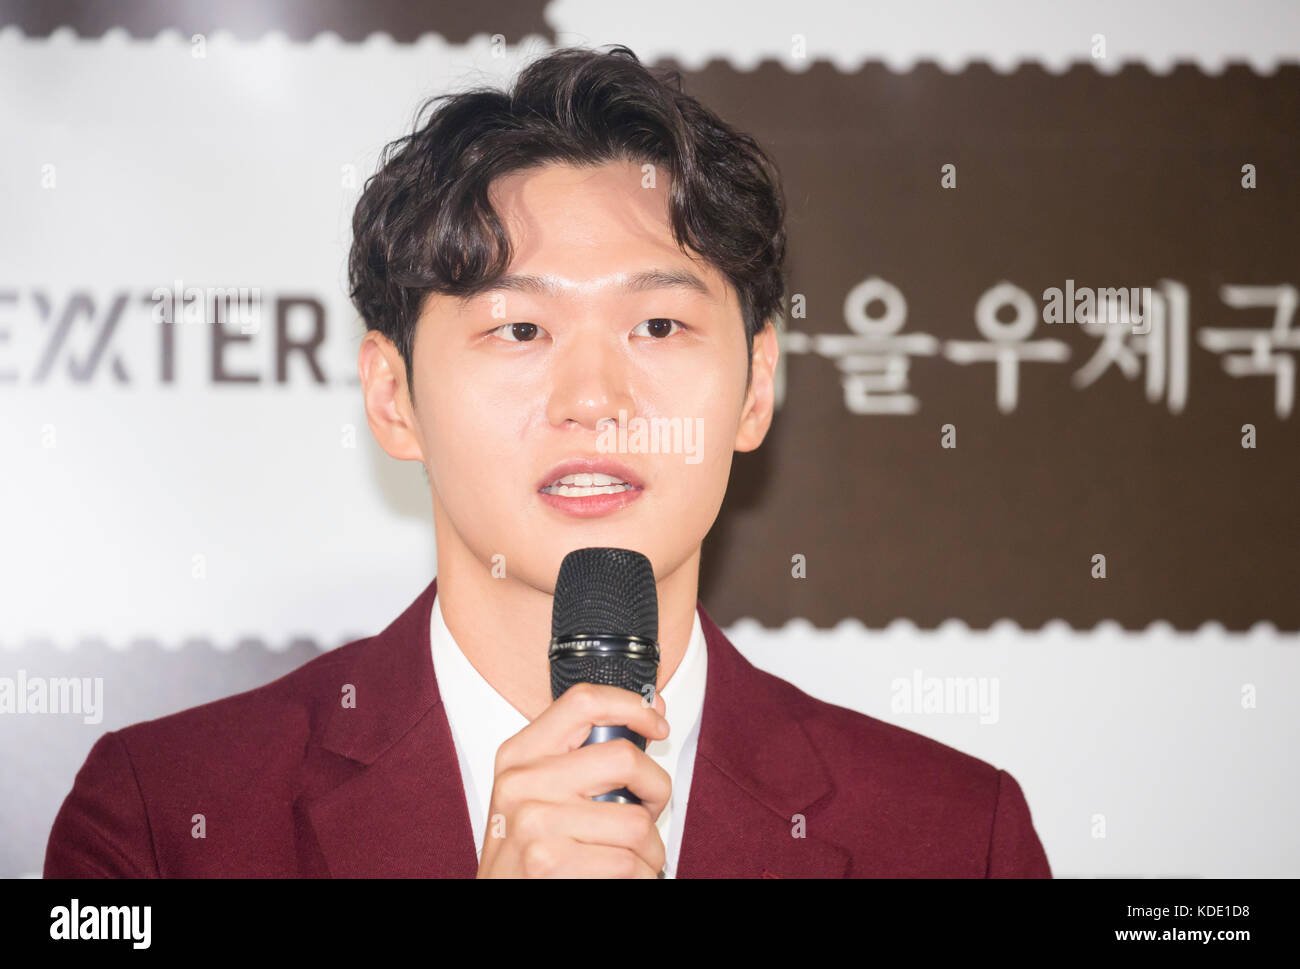 Lee Hak-Joo, Oct 12, 2017 : South Korean actor Lee Hak-Joo attends a press  conference after a press preview of his new movie, 'Autumn Sonata' in  Seoul, South Korea. Credit: Lee Jae-Won/AFLO/Alamy